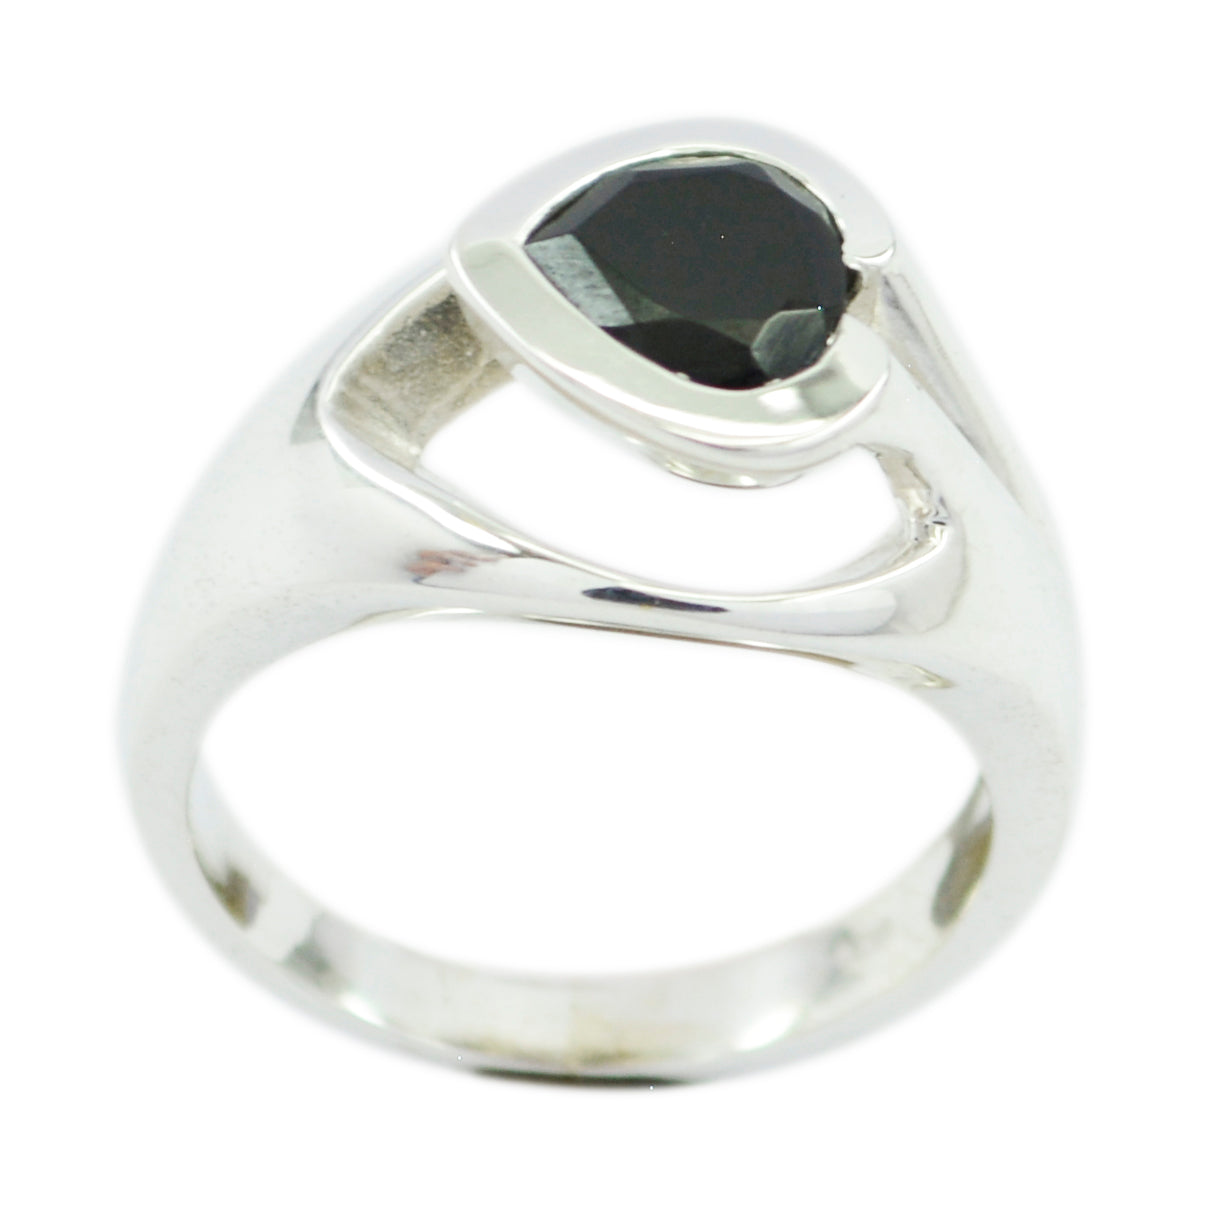 Gorgeous Gemstone Black Onyx Sterling Silver Ring Jewelry For Moms